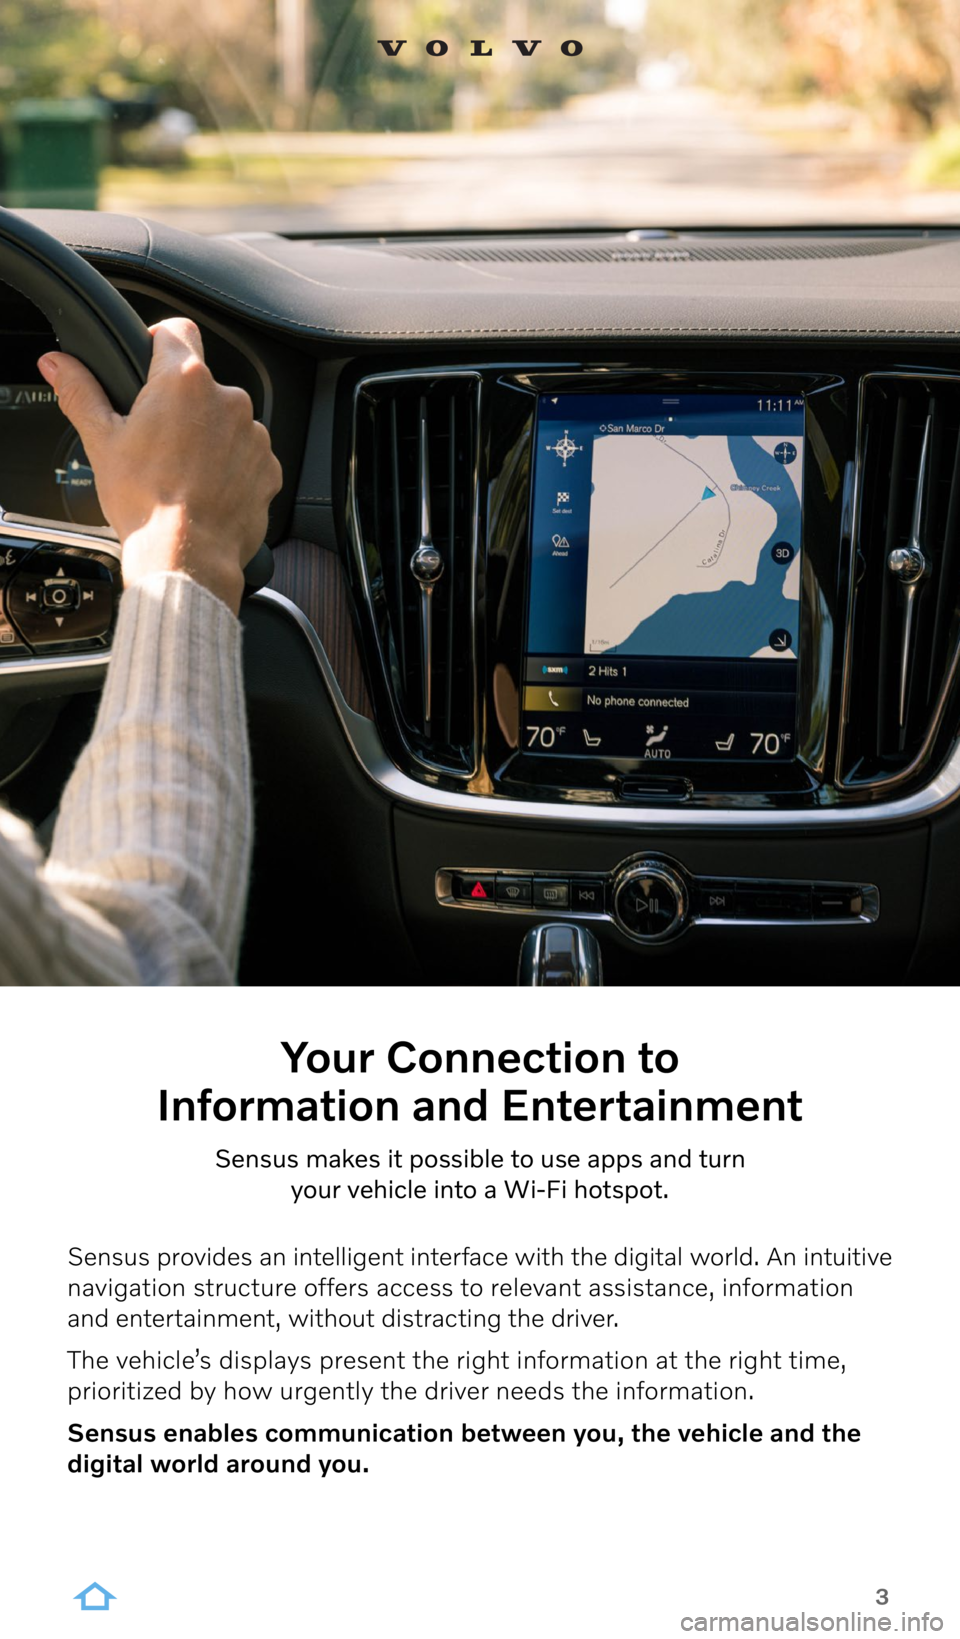 VOLVO XC90 2022  Sensus Digital Guide 3
Your Connection to  
Information and Entertainment
Sensus makes it possible to use apps and turn  
your vehicle into a Wi-Fi hotspot.
Sensus provides an intelligent interface with the digital world.